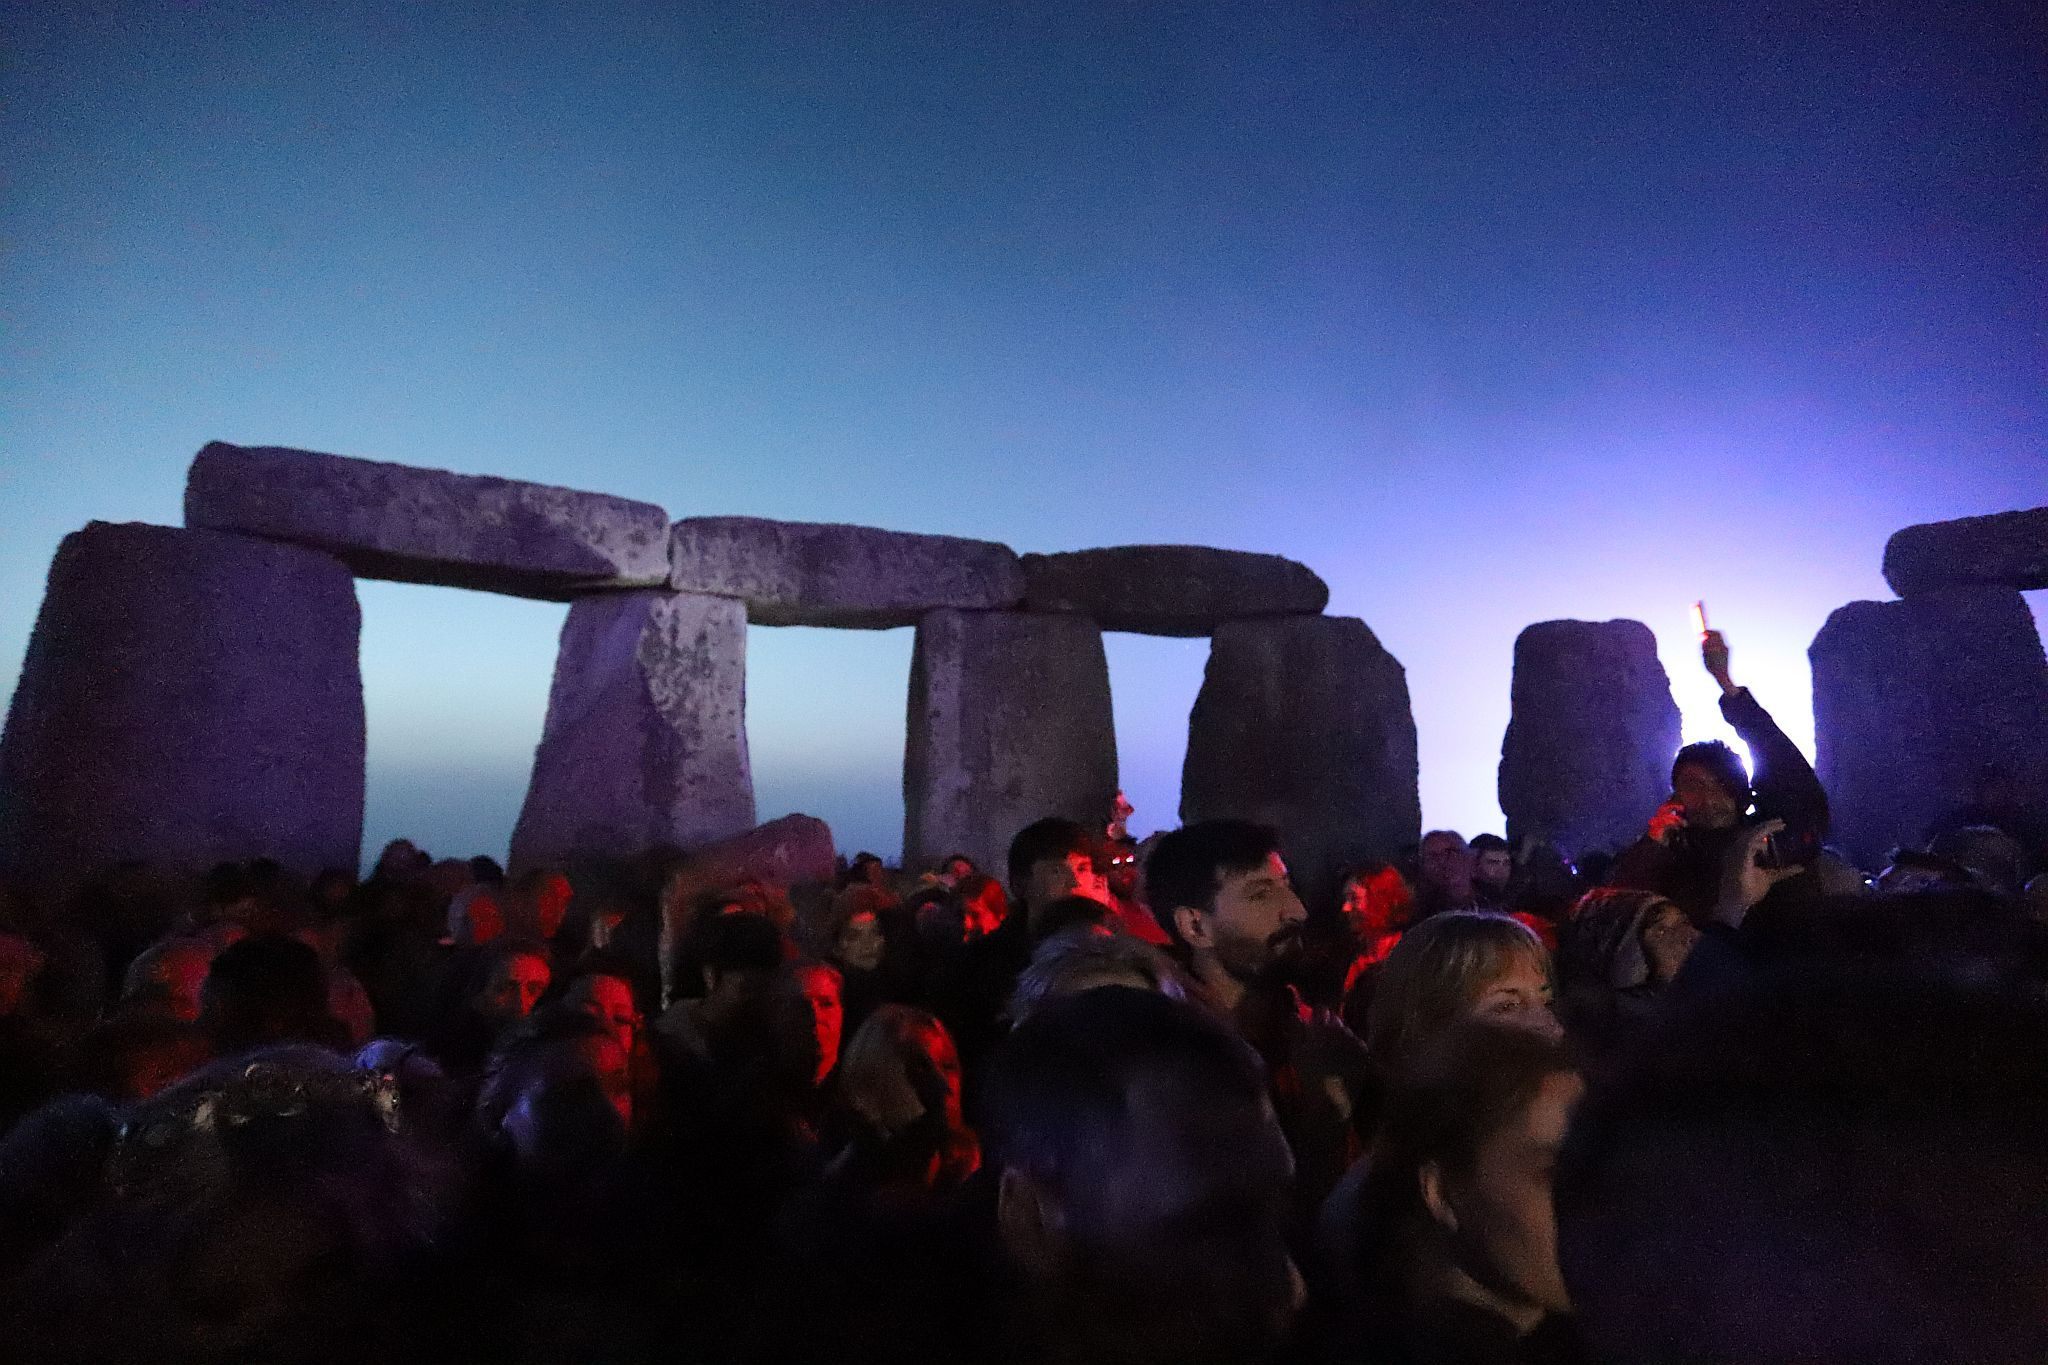 Crowds in the centre of the stones. The 2023 Summer Solstice longest day at Stonehenge in Wiltshire, UK. Photo taken 21-Jun-2023.